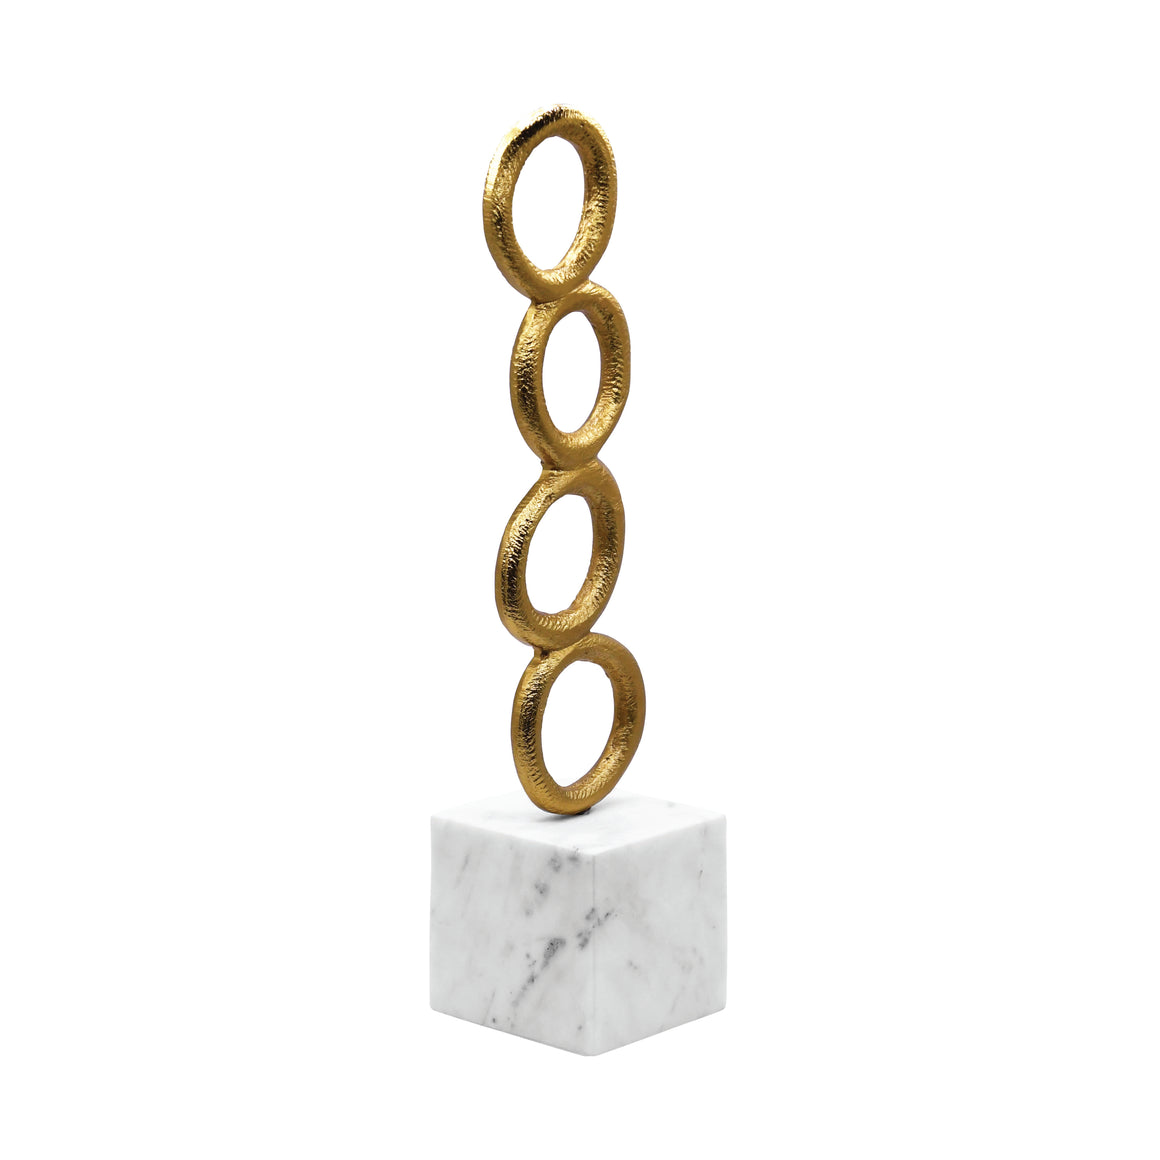 Stacked Circle Shaped Textured Brass Sculpture with White Marble Base